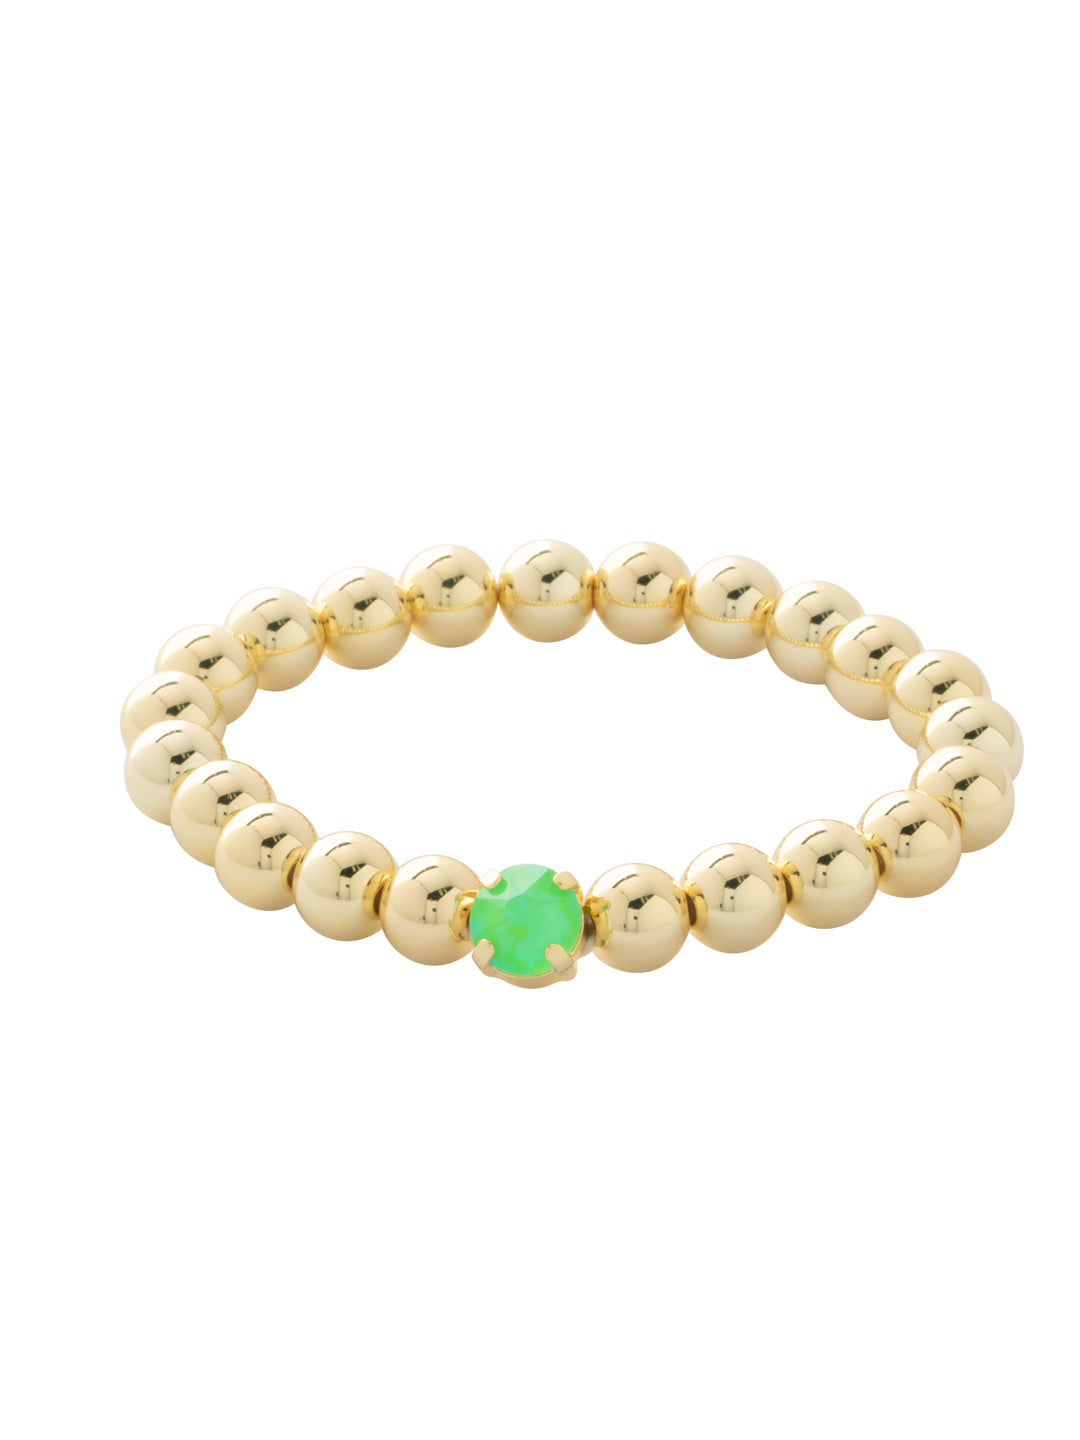 Zola Single Crystal Stretch Bracelet - 4BFJ21BGETG - <p>The Zola Single Crystal Stretch Bracelet features repeating metal beads and a single round cut crystal on a multi-layered stretchy jewelry filament, creating a durable and trendy piece. From Sorrelli's Electric Green  collection in our Bright Gold-tone finish.</p>